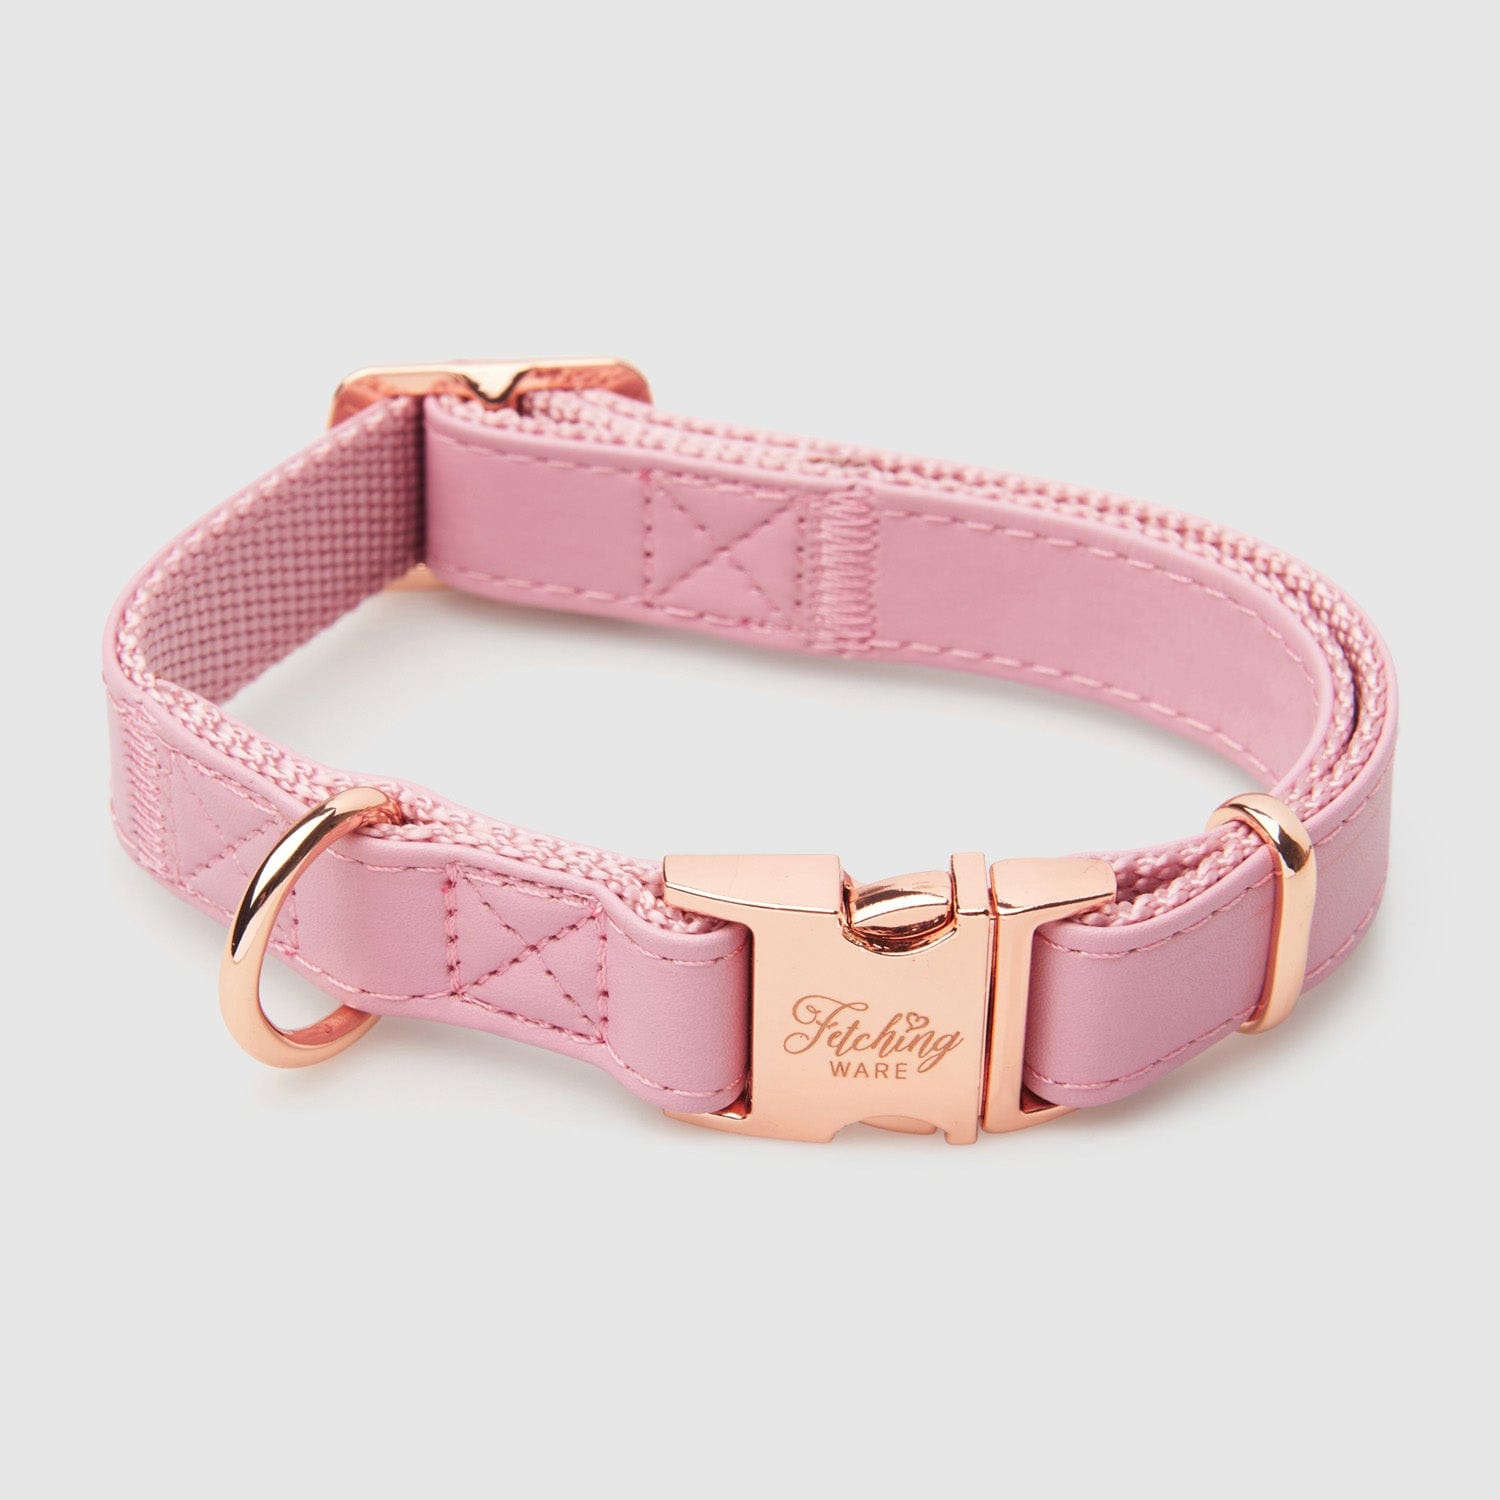 Our Rosa in Rose Gold, Pink Dog Collar, Adjustable Pet Collar